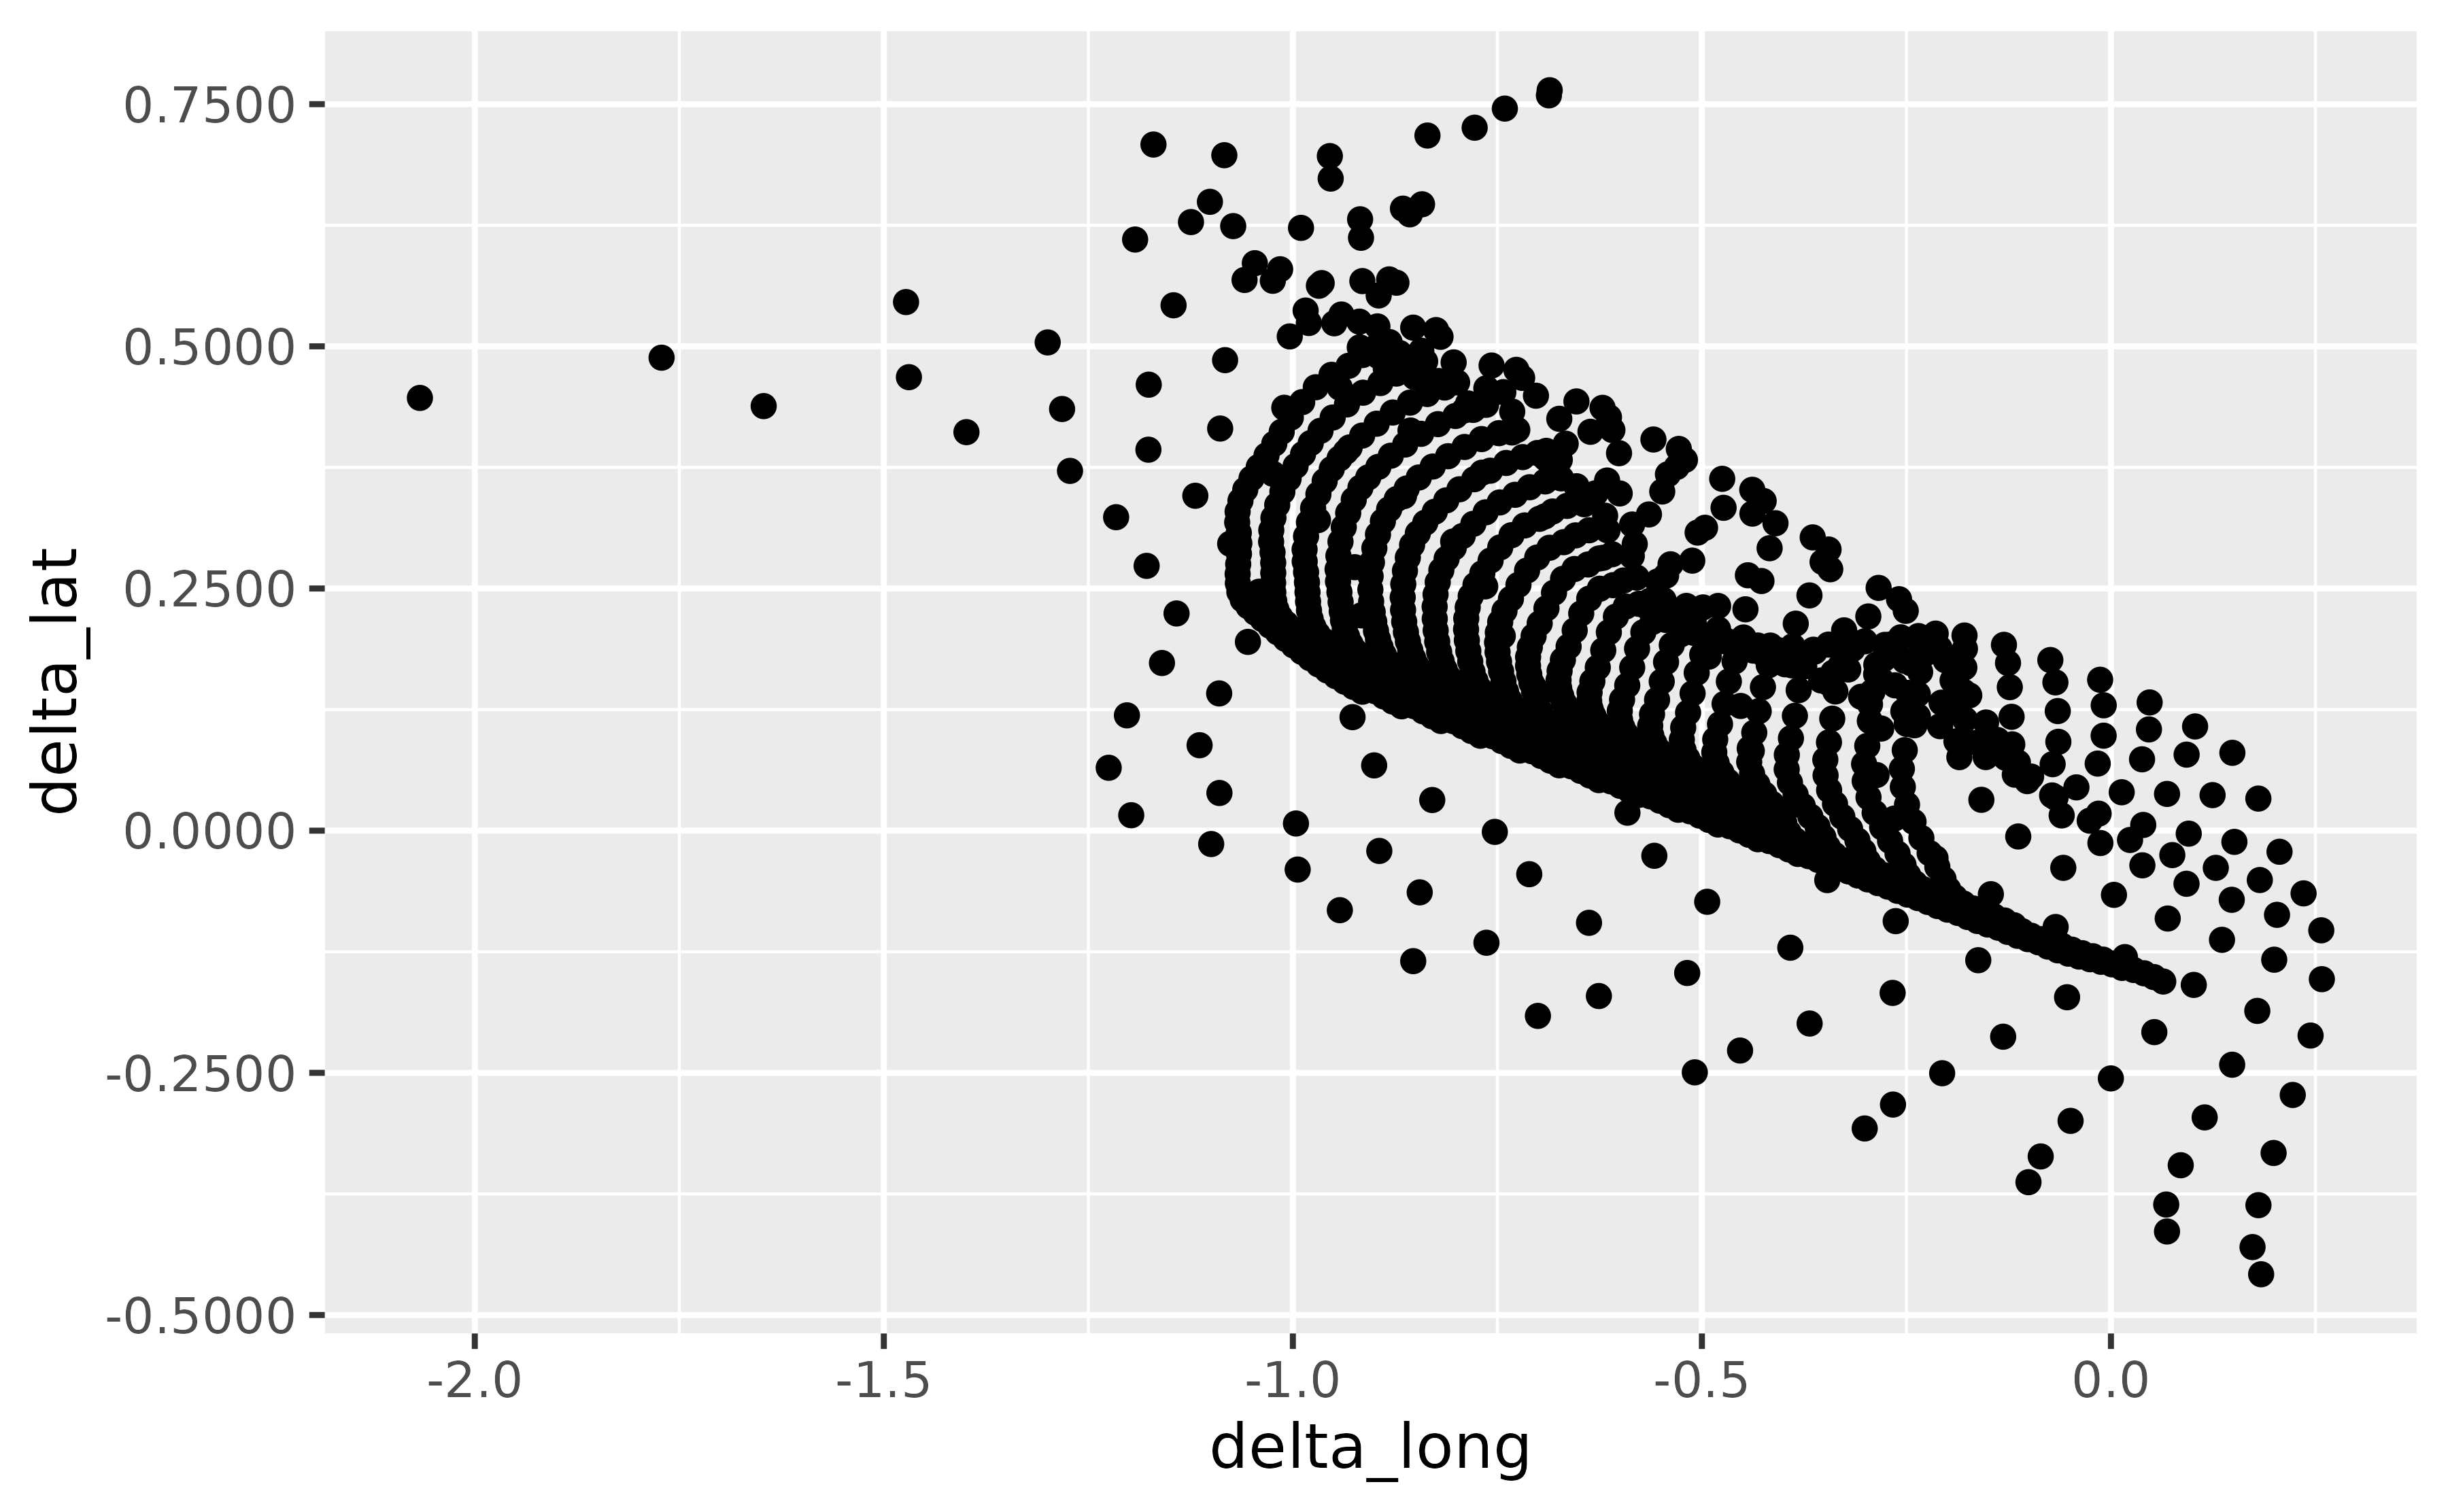 A scatter plot showing the difference in longitude on the x-axis and difference in latitude on the y-axis for seal movements. The x-axis labels have one digit after the decimal place. The y-axis labels have four digits after the decimal place.